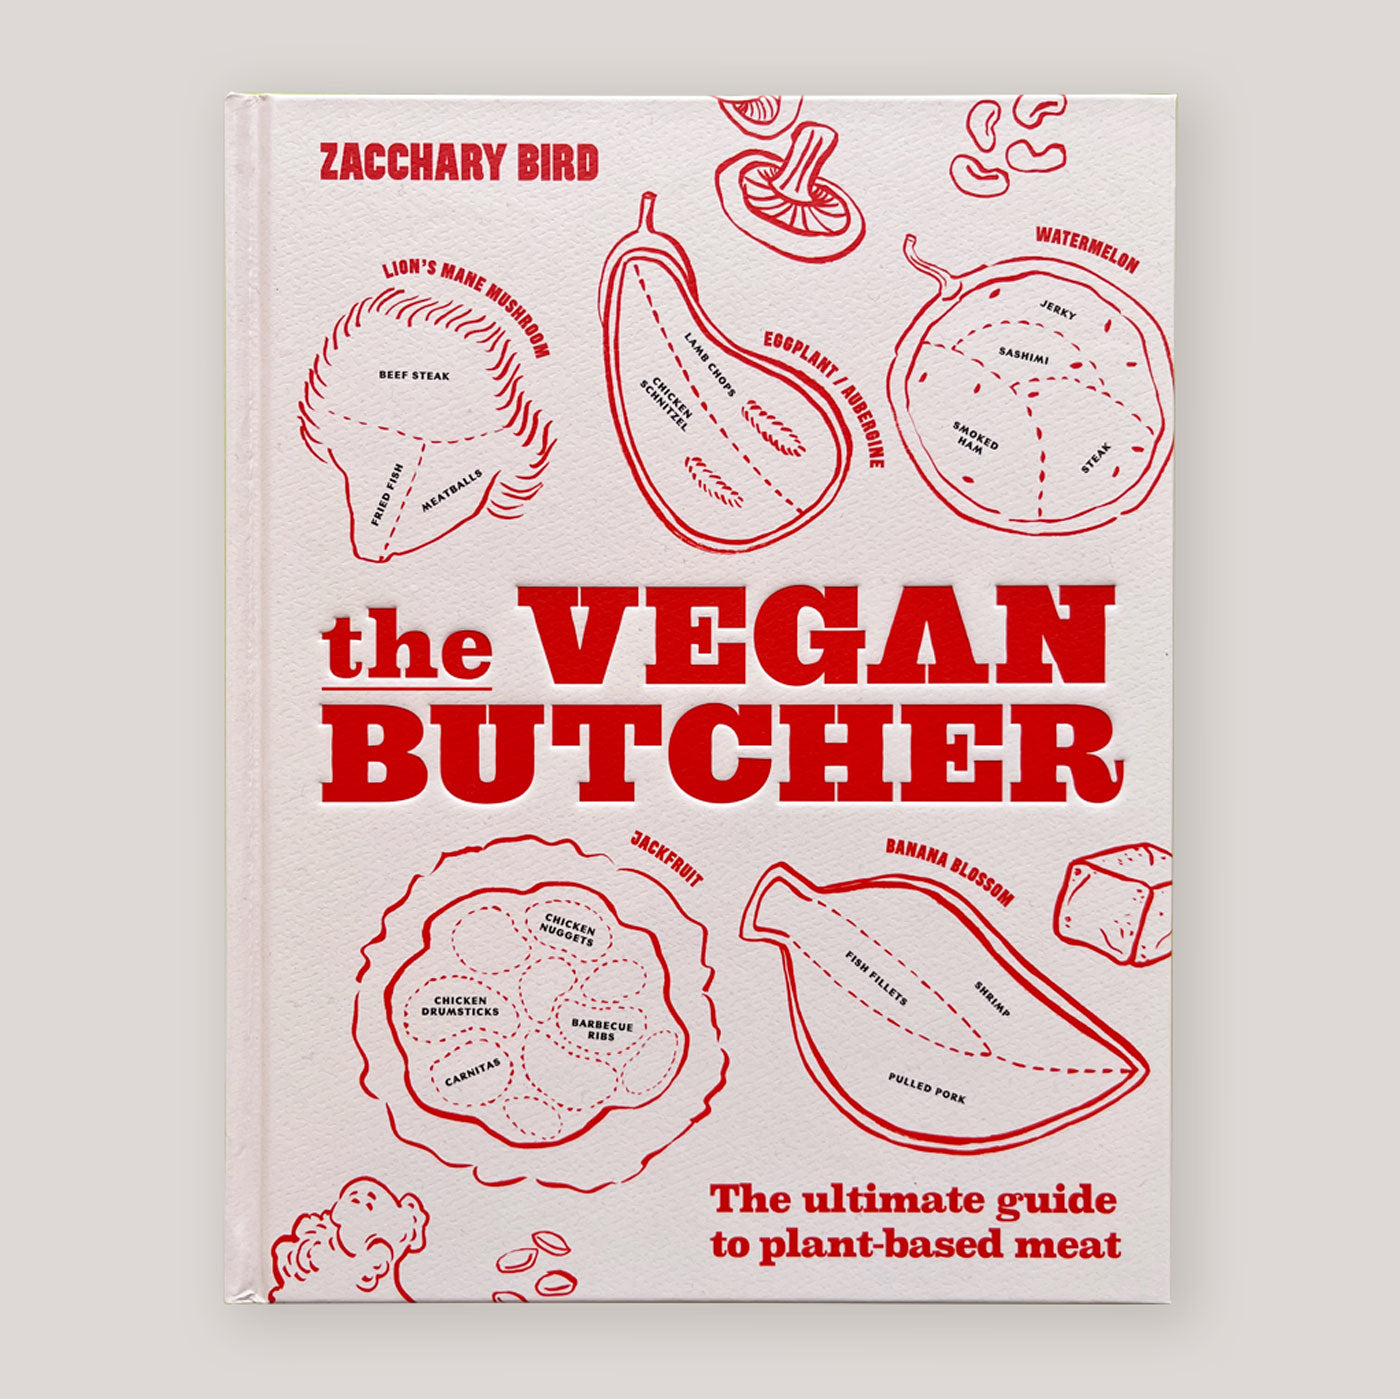 The Vegan Butcher: The Ultimate Guide to Plant-Based Meat | Zacchary Bird | Colours May Vary 